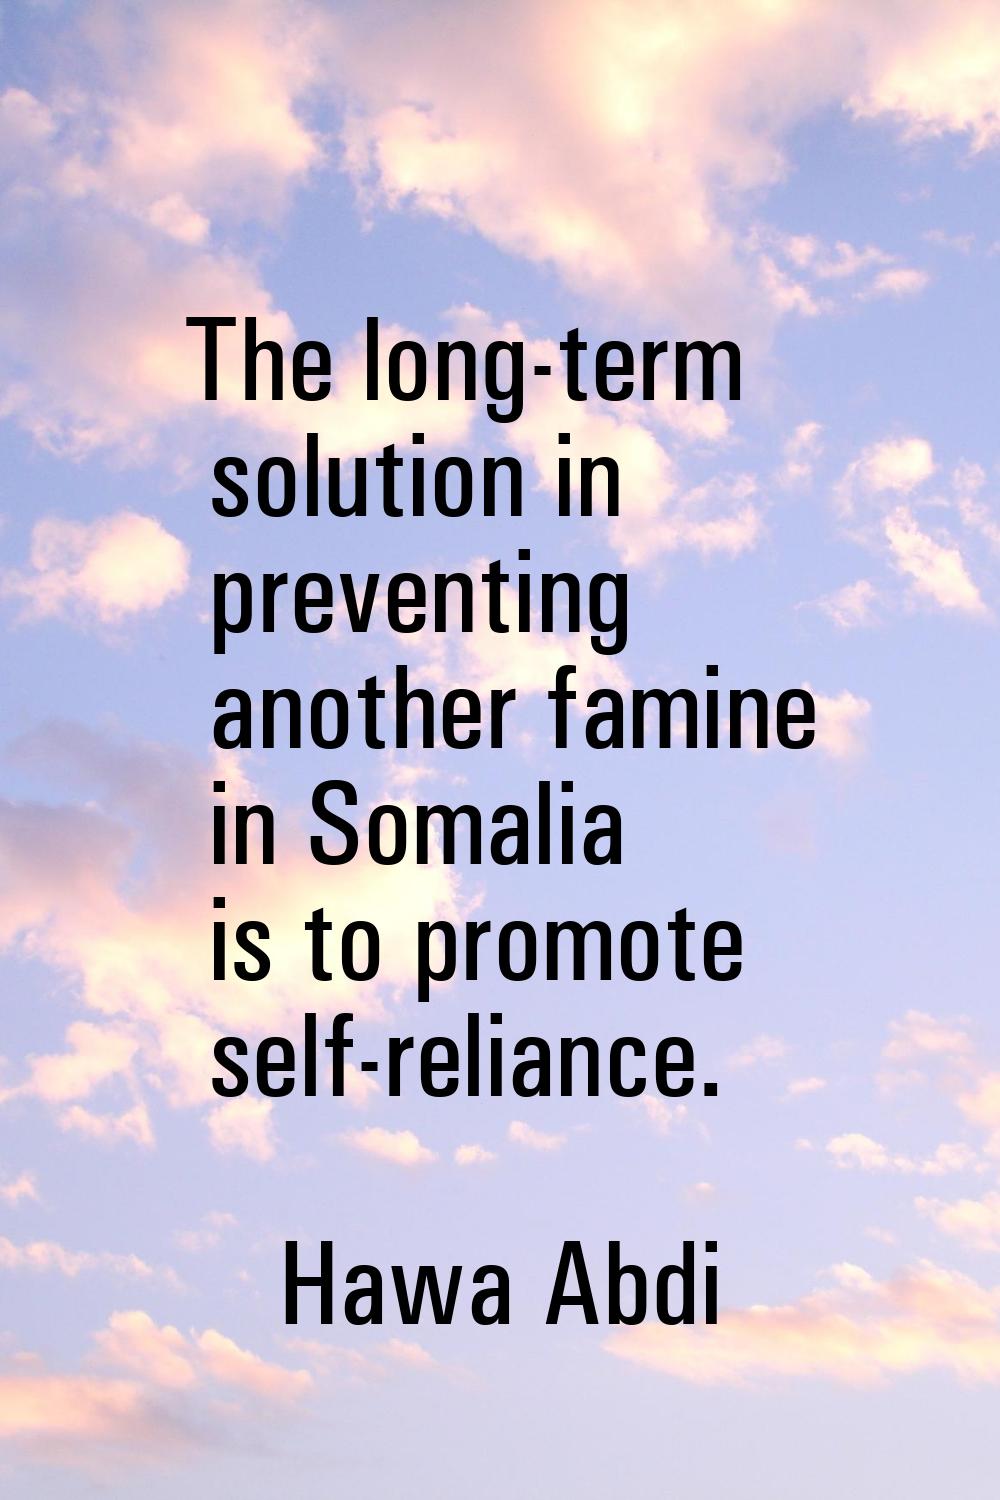 The long-term solution in preventing another famine in Somalia is to promote self-reliance.